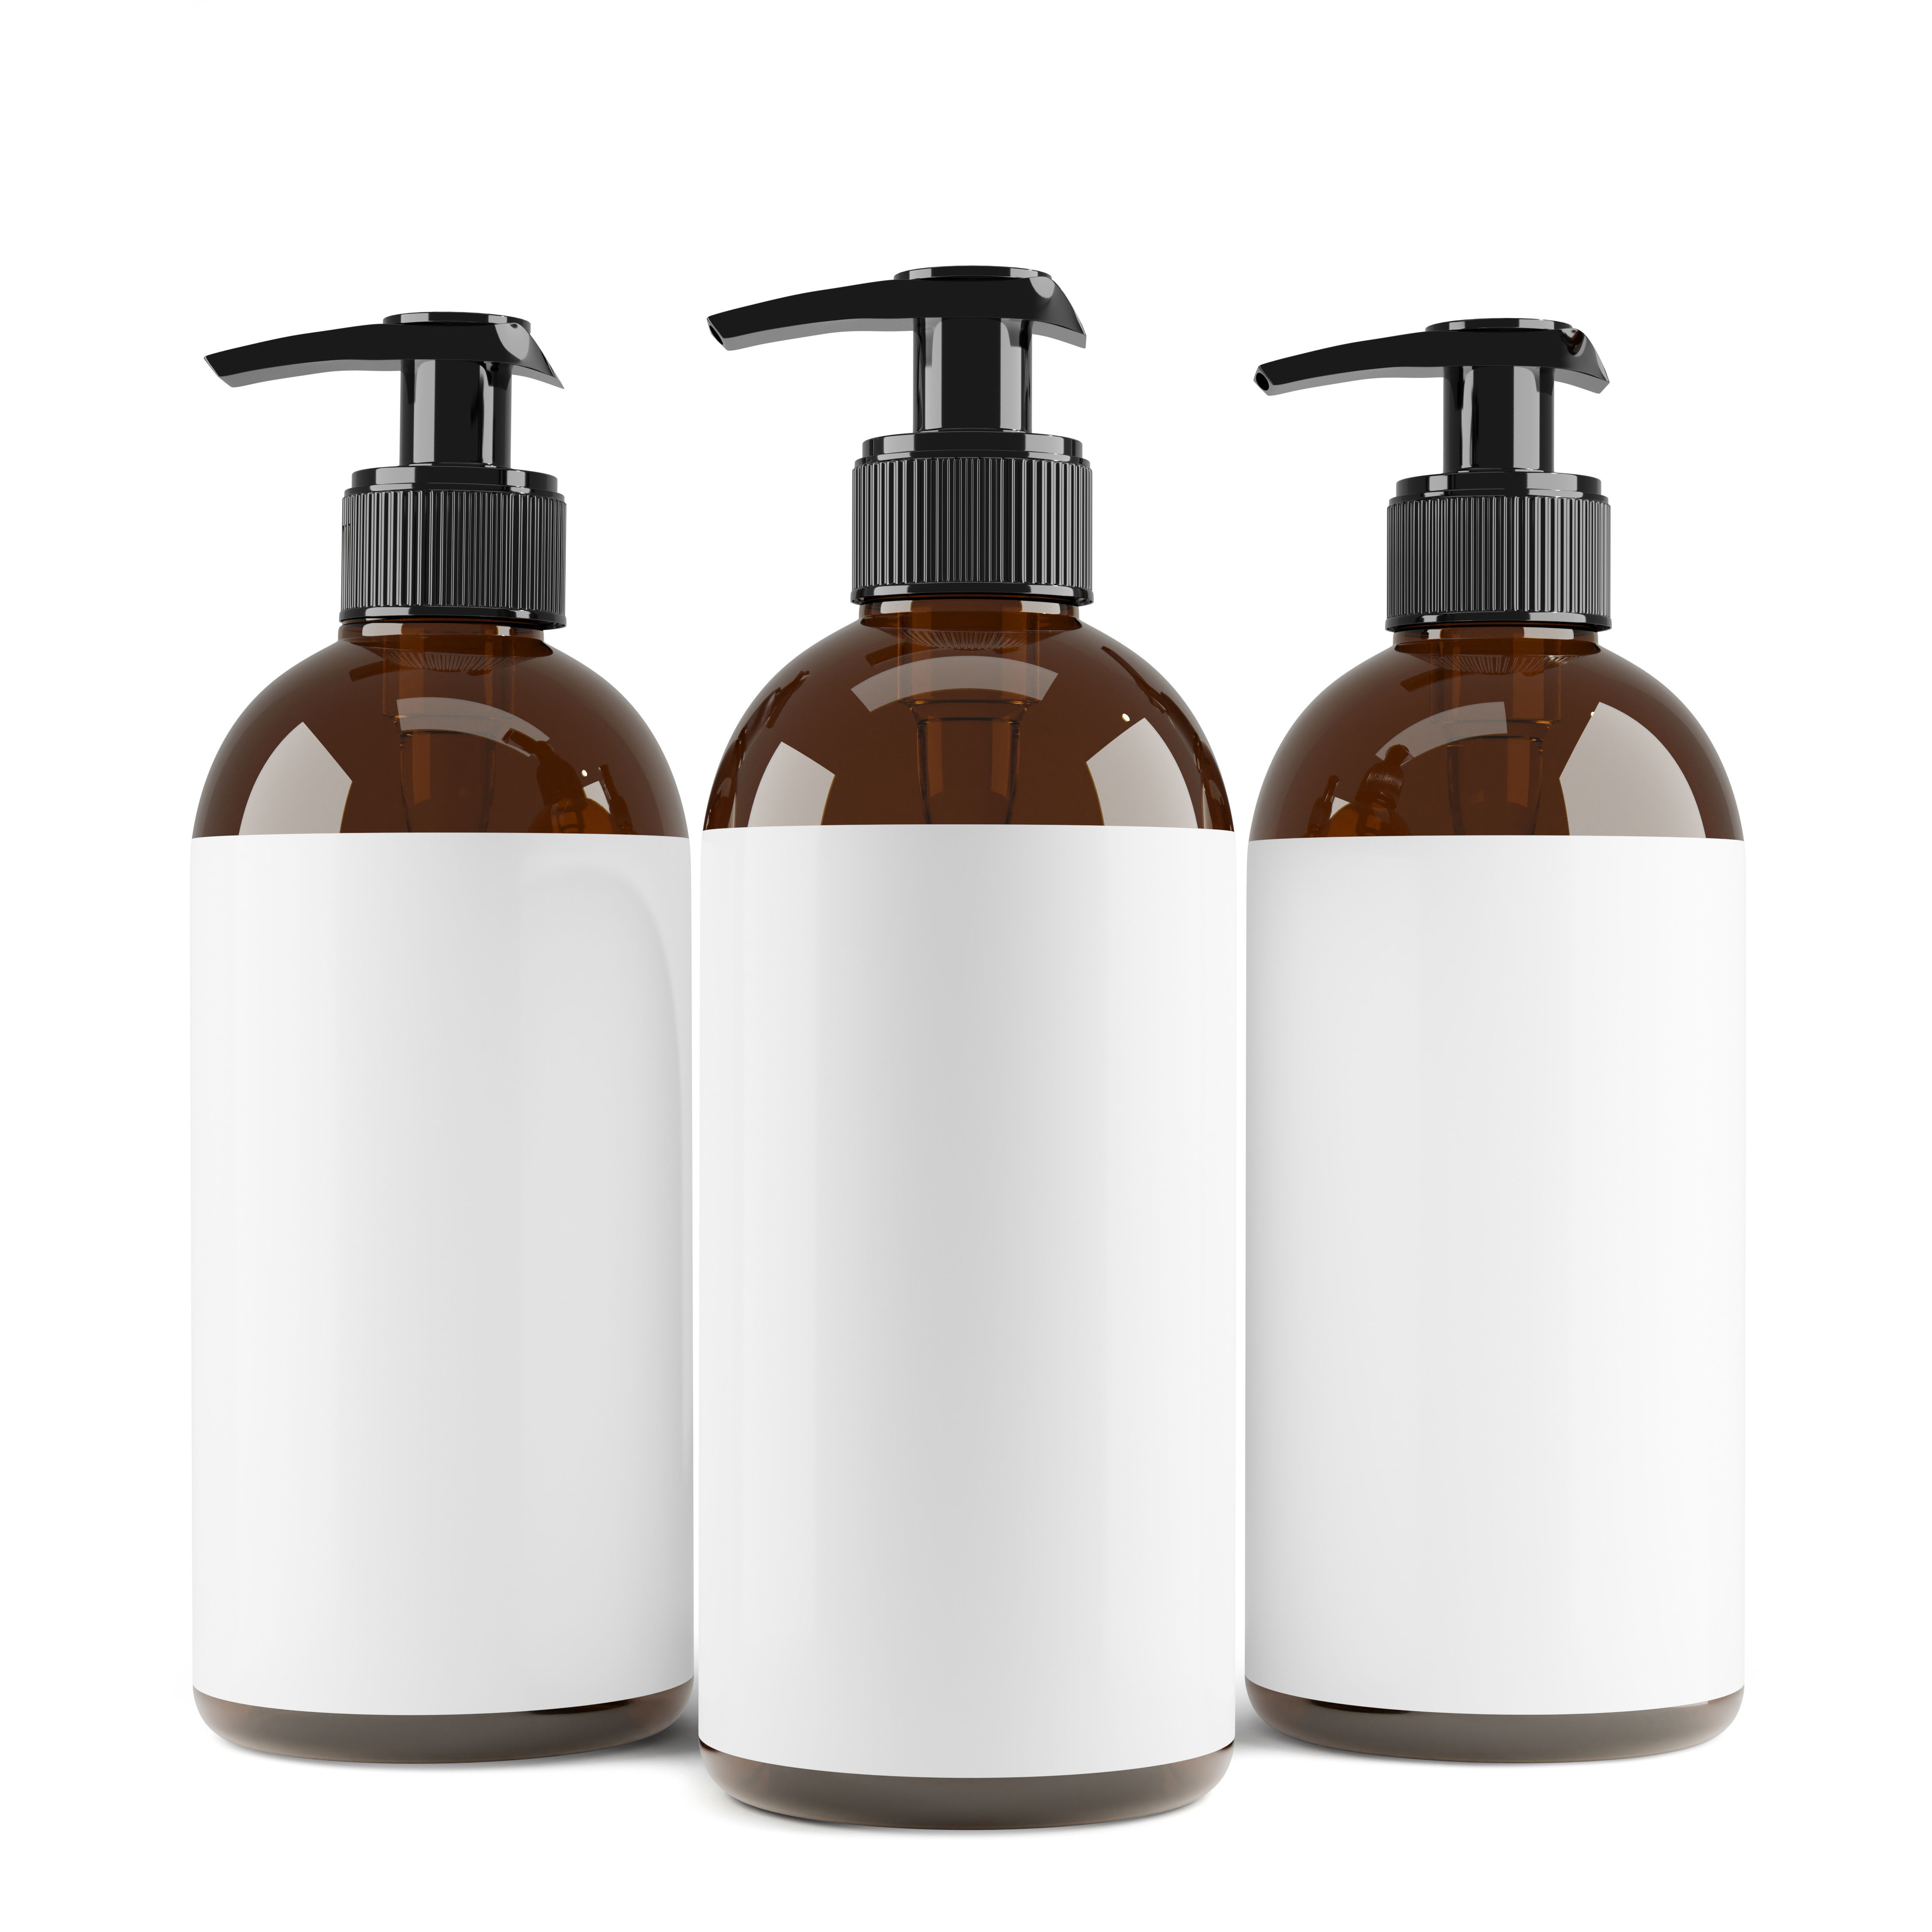 Bathroom Soap and Soap Dispensers